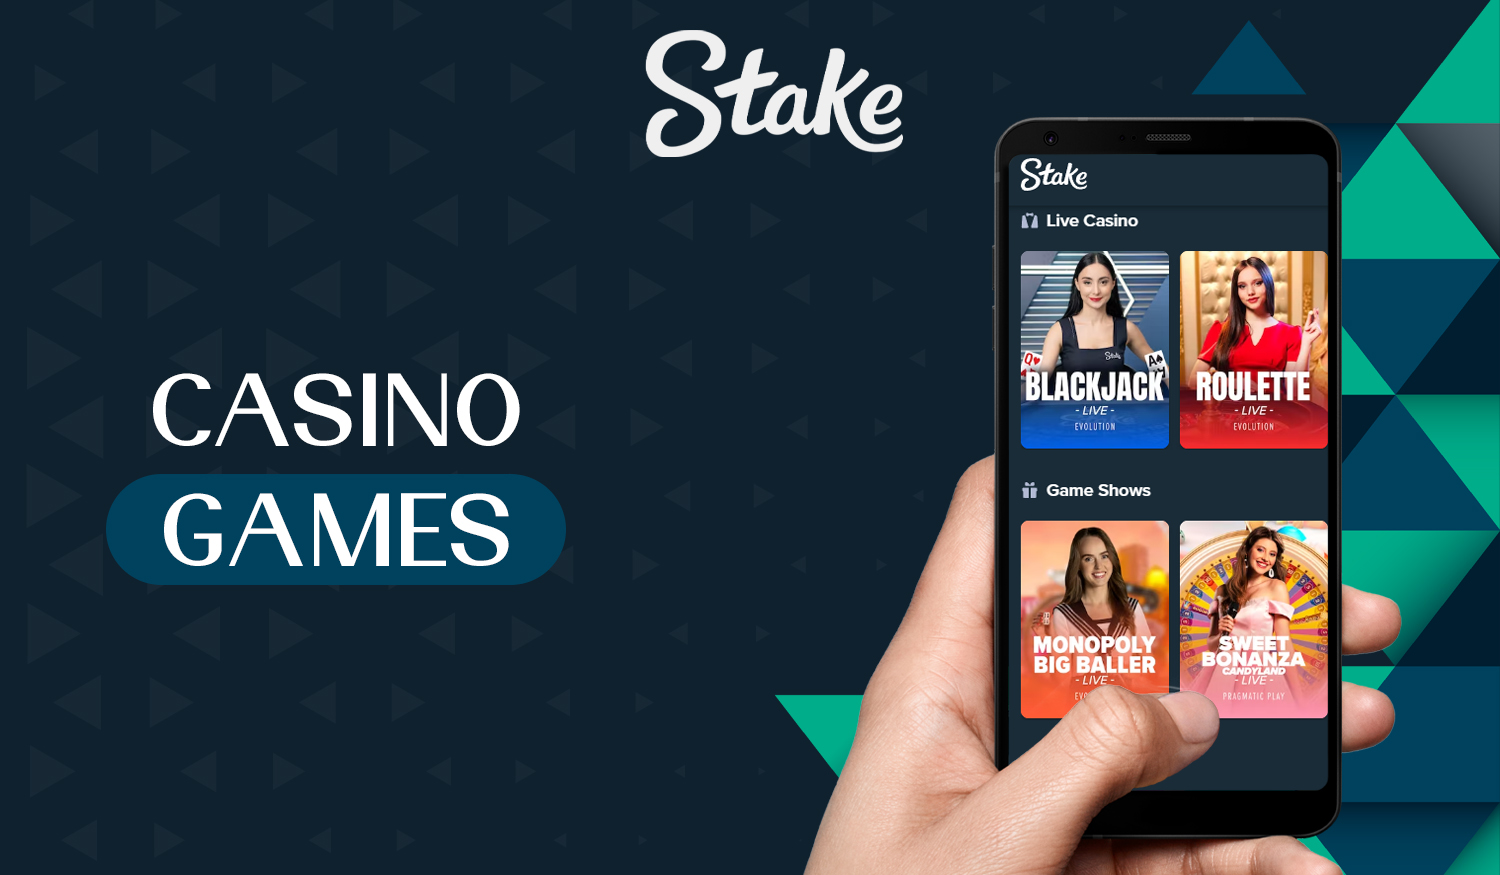 What games in the online casino section are available to Indian users in the Stake app? 